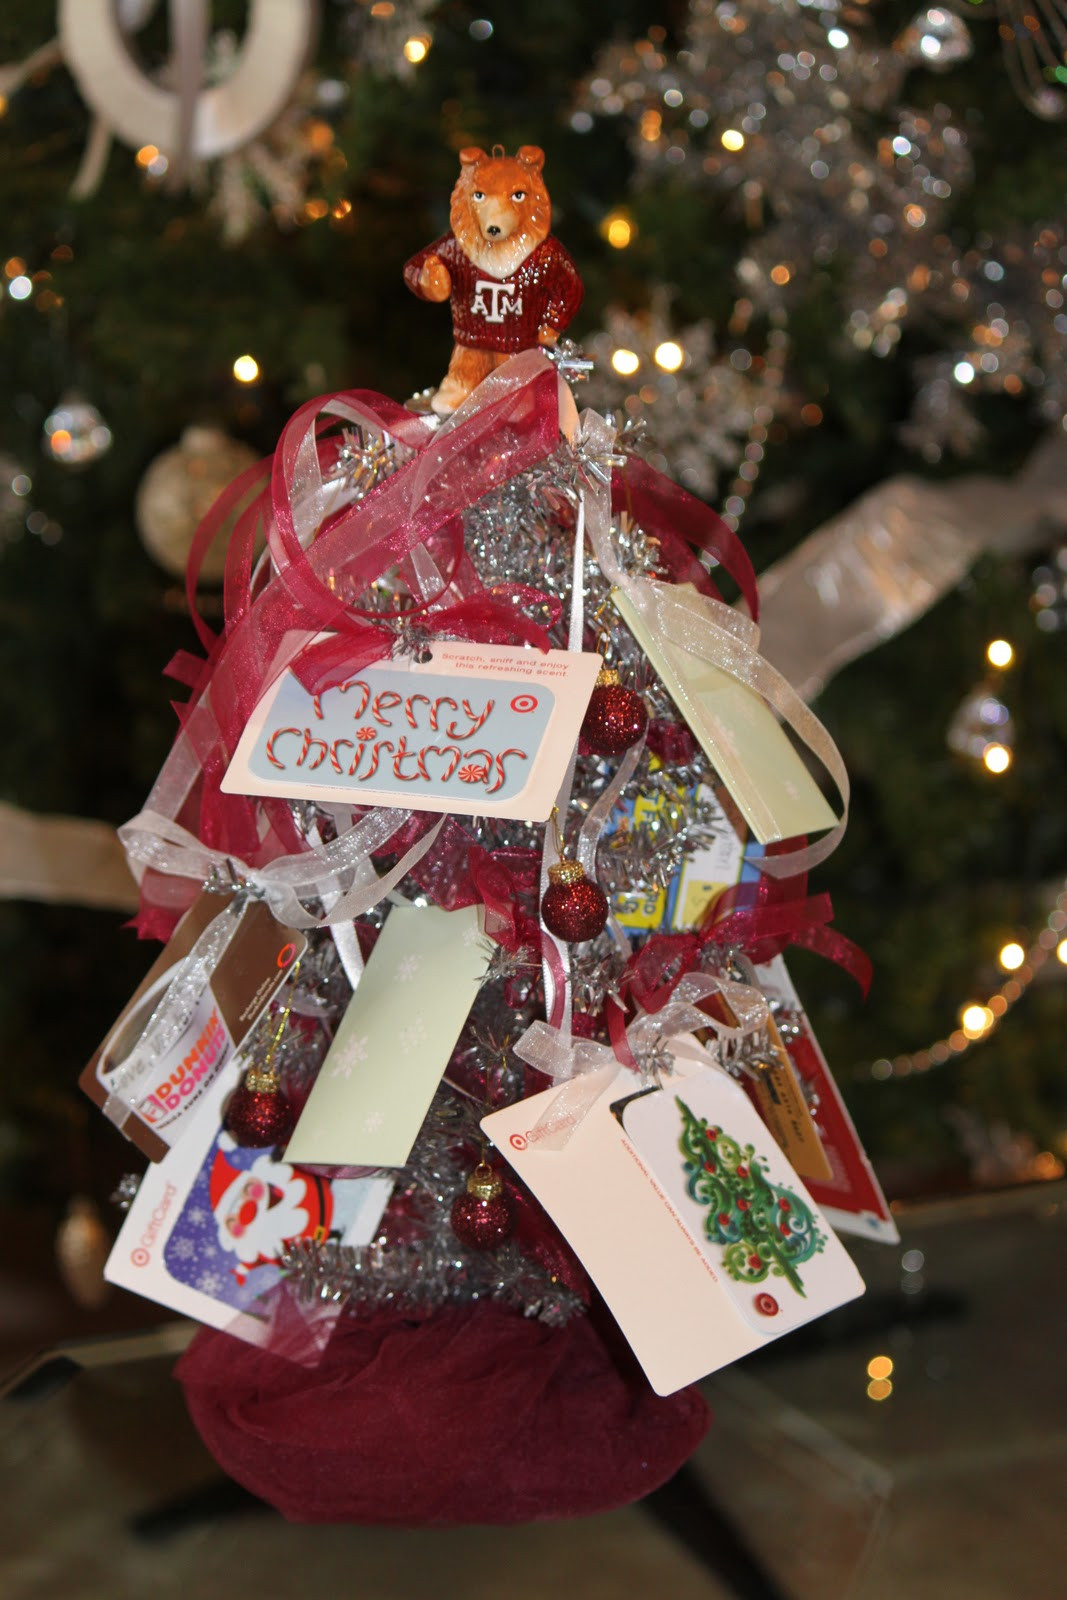 Christmas Tree With Gifts
 The Blackberry Vine Gift Card Christmas Tree